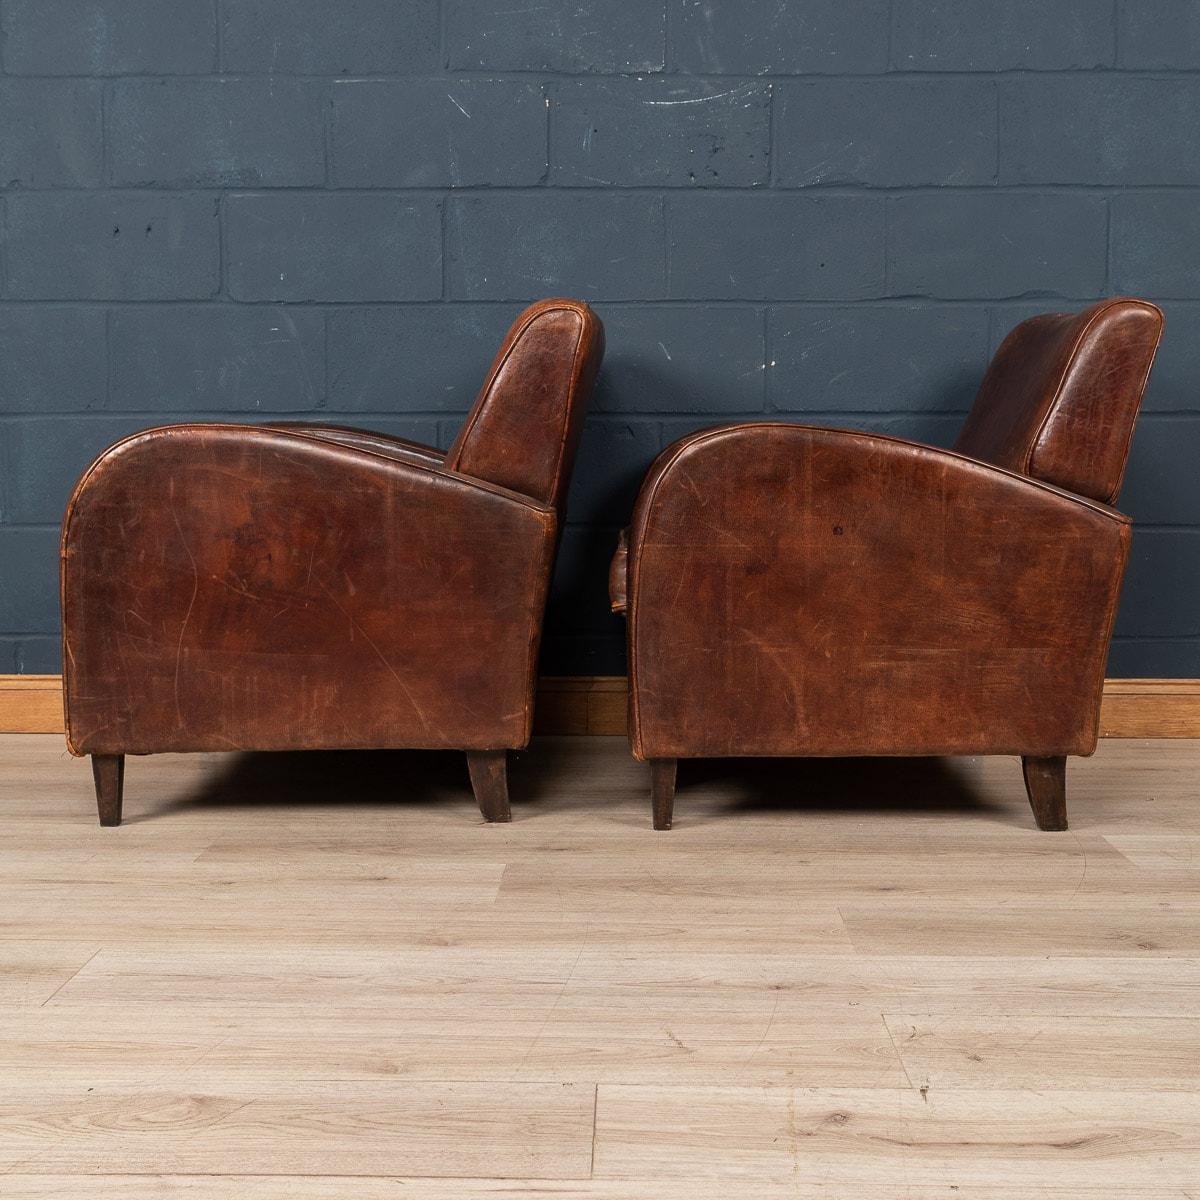 20th Century Pair of Dutch Leather Club Chairs For Sale 2